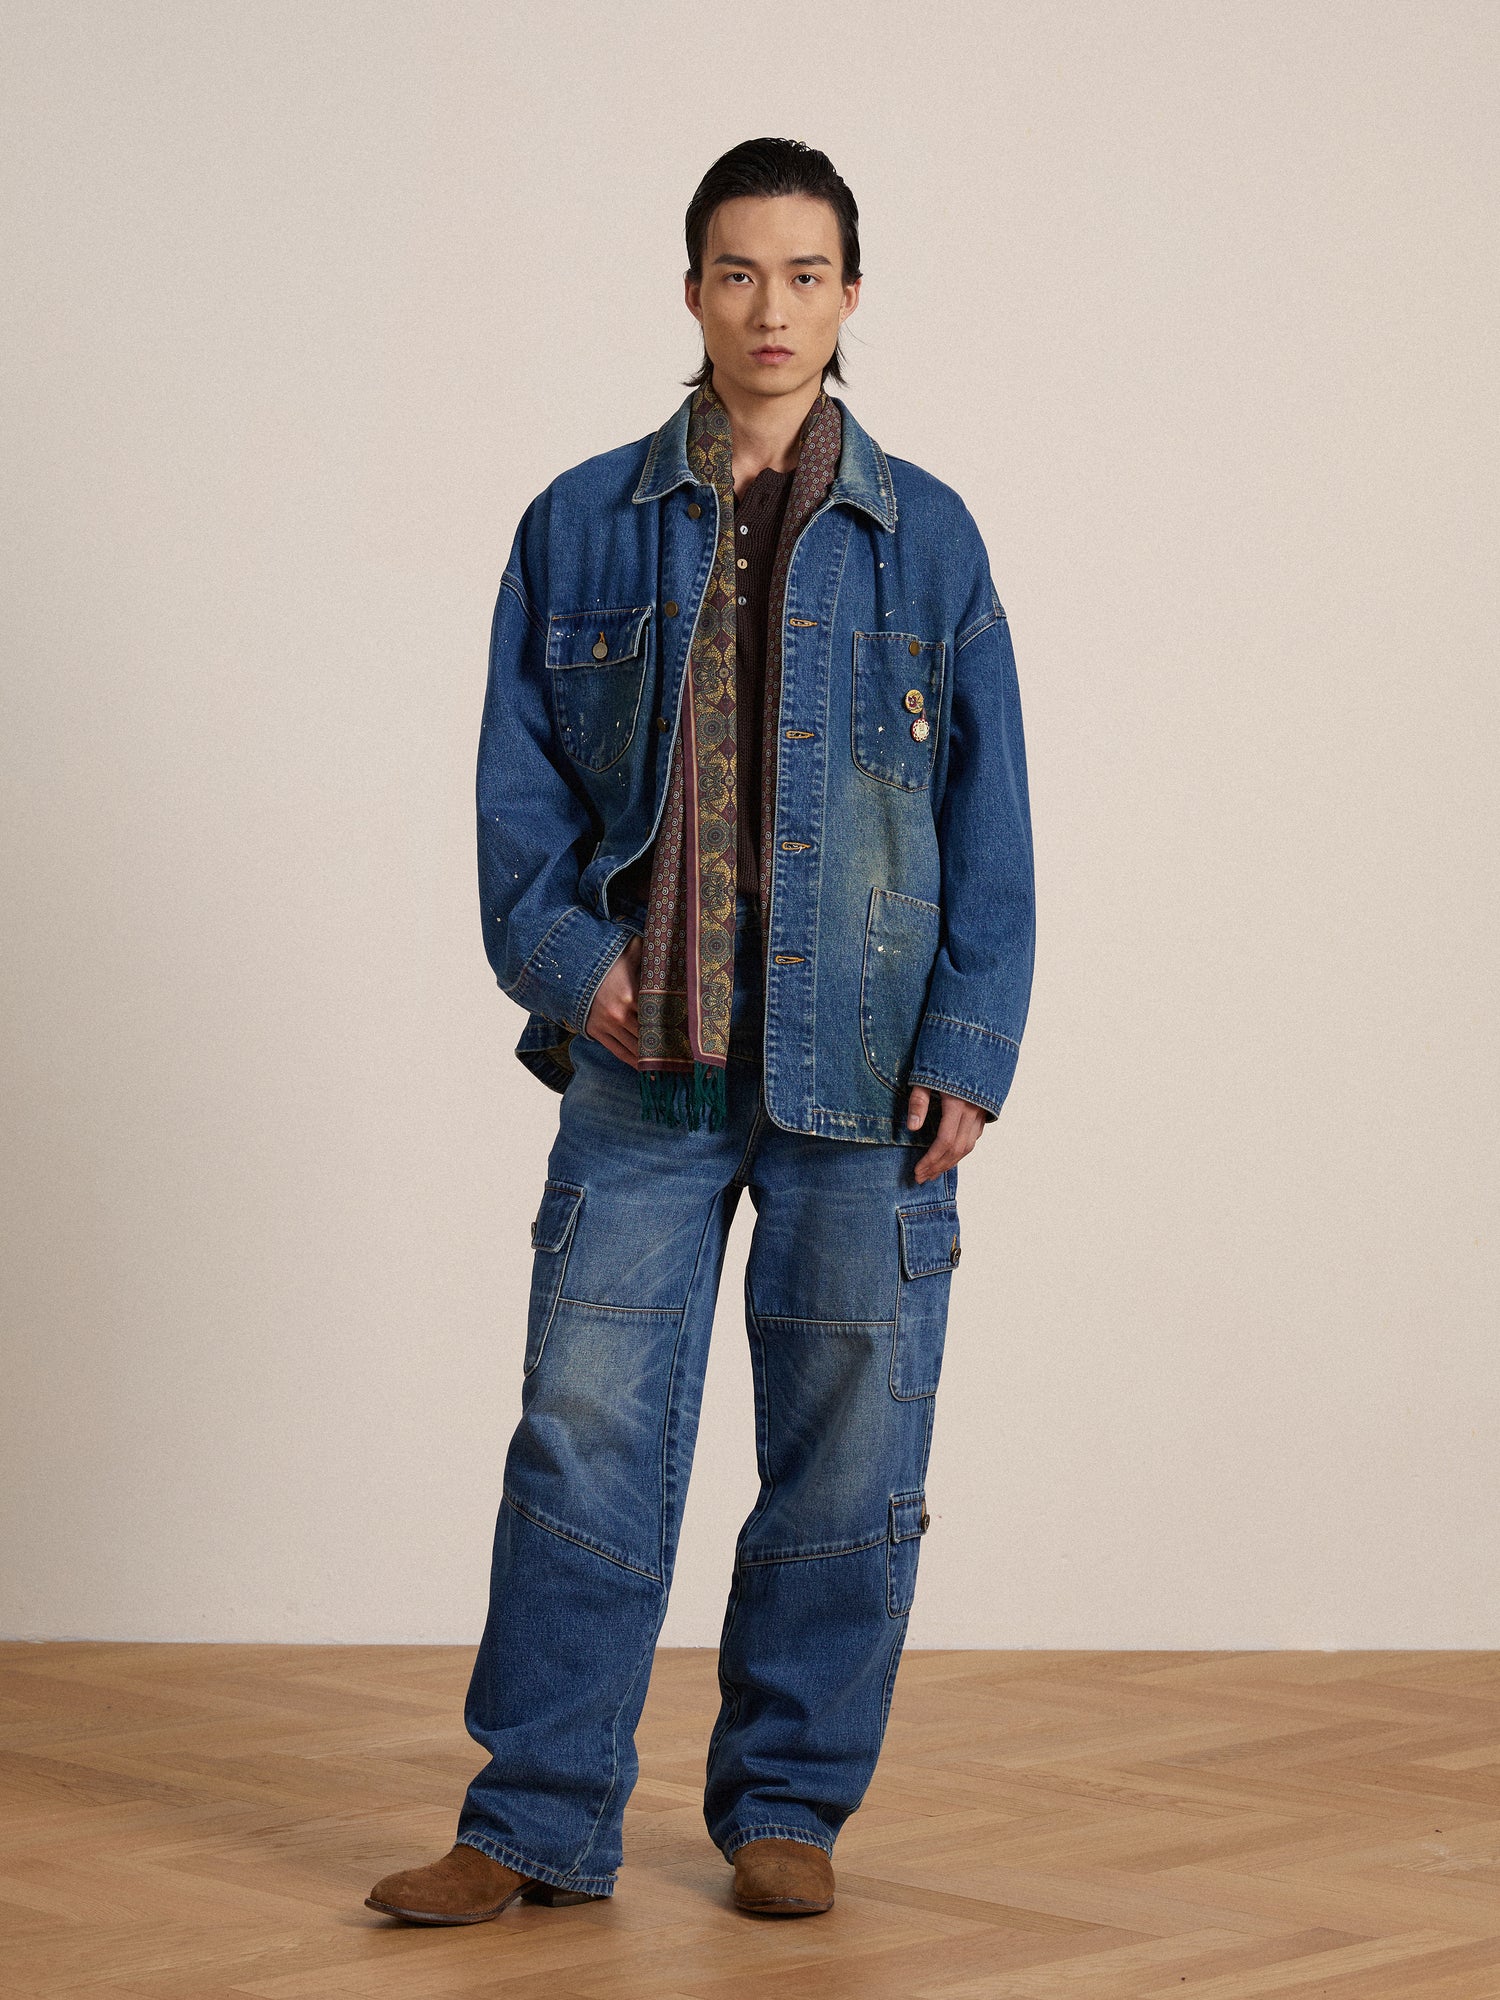 A model wearing a Kavir Denim Painter Jacket and jeans, styled by an artist from Found.